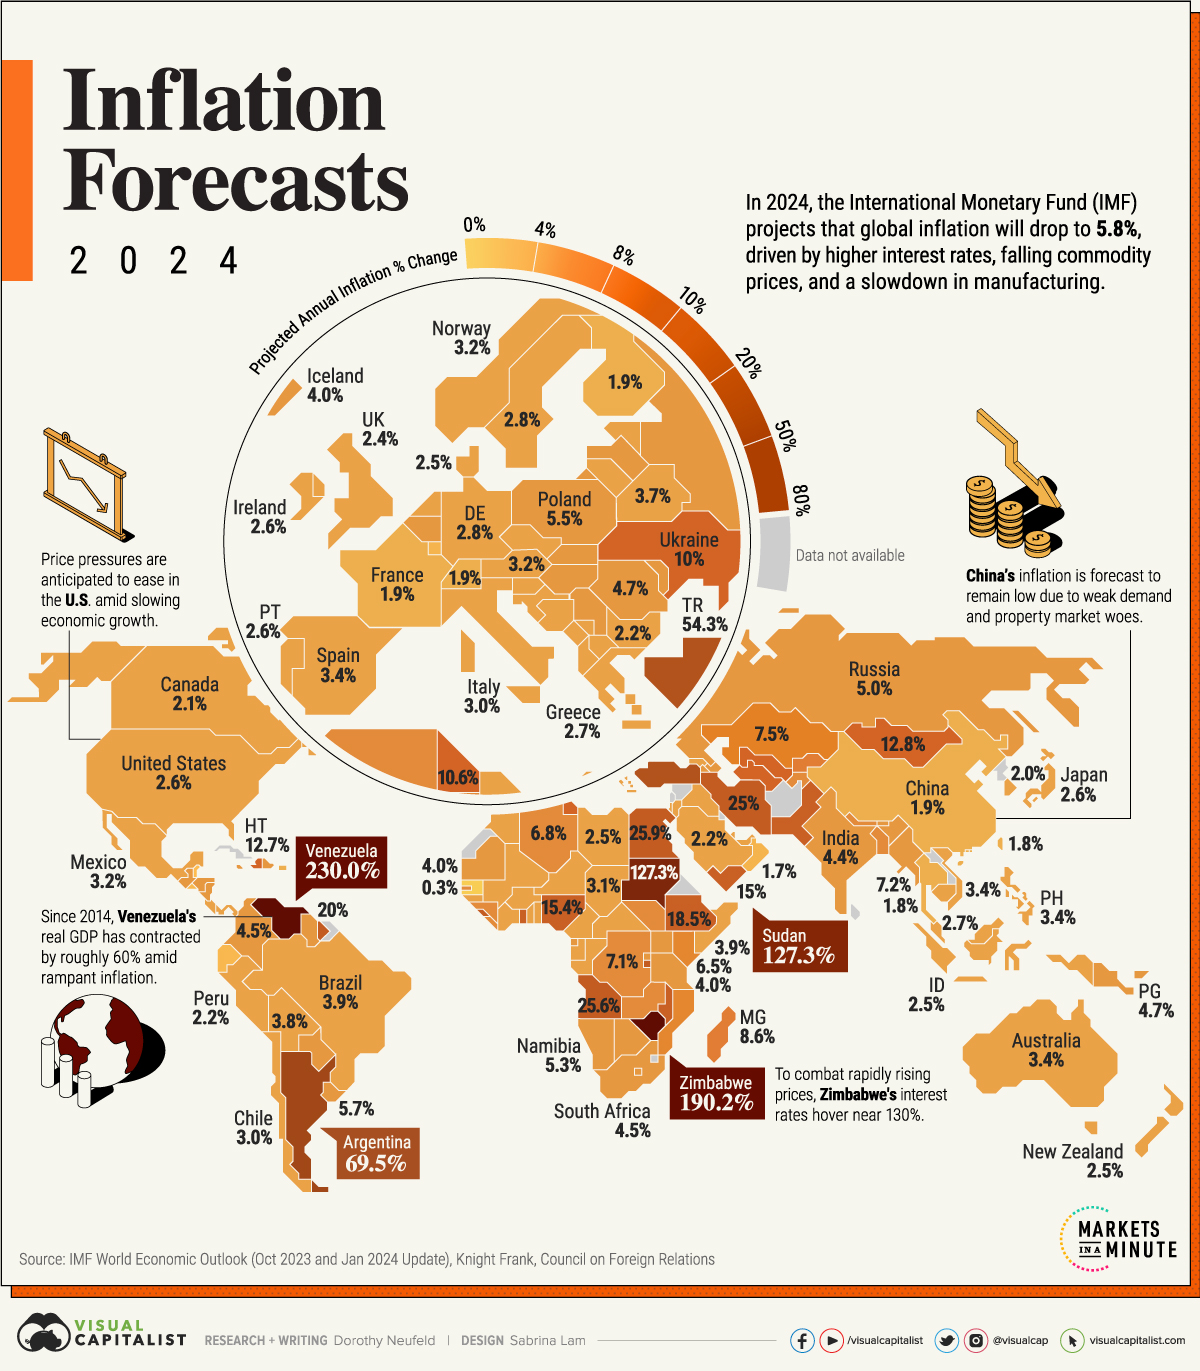 Mapped Inflation Projections by Country, in 2024